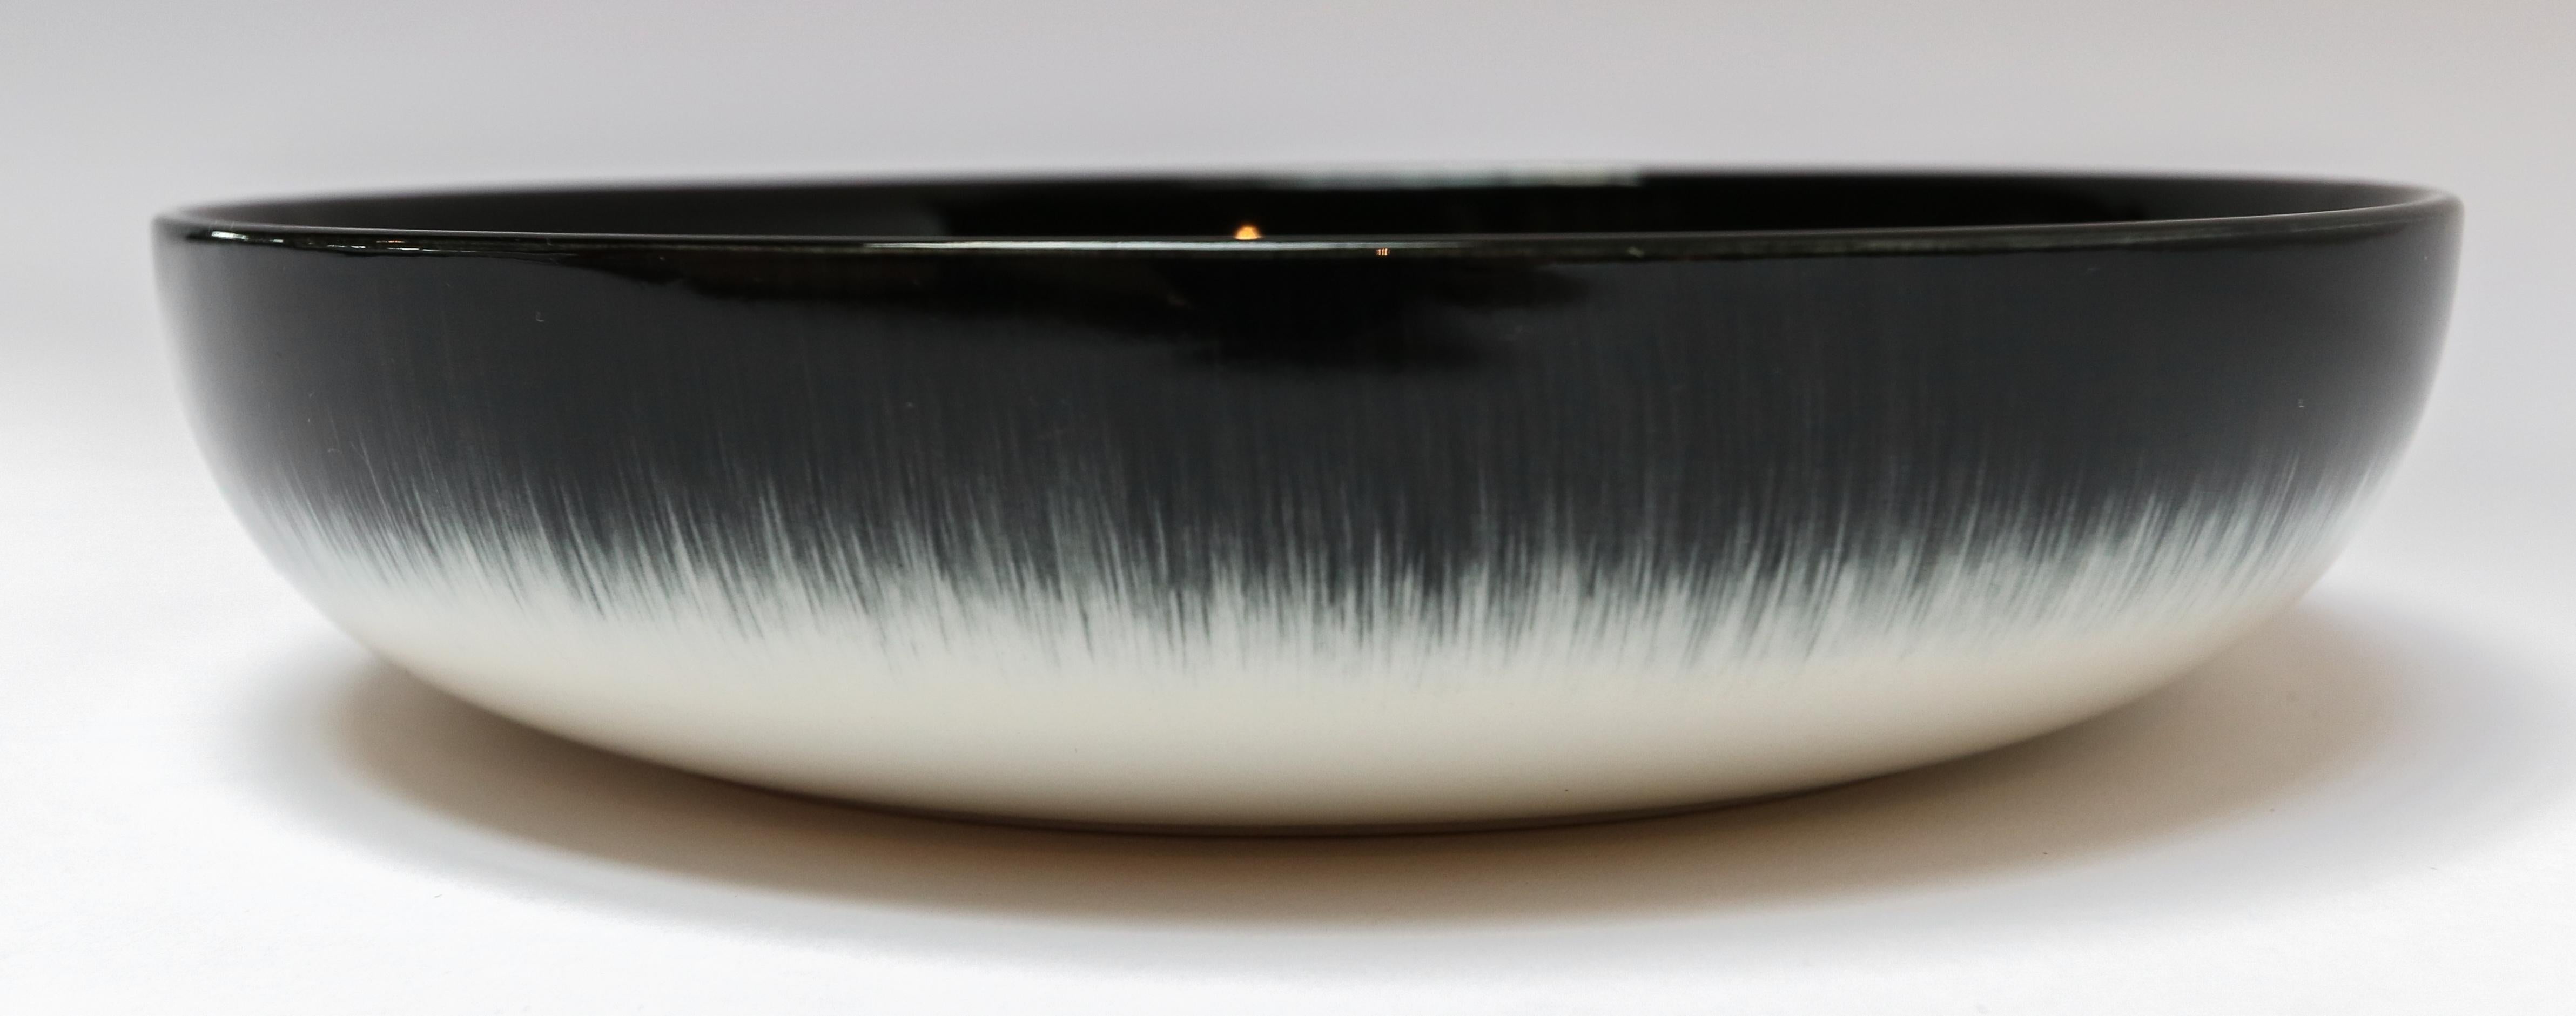 Ann Demeulemeester for Serax Dé medium high plate / bowl in off white / black. Hand painted with a starburst pattern. Measures: 18.5cm diameter x 4.2 cm high. Must be purchased in quantities of two.